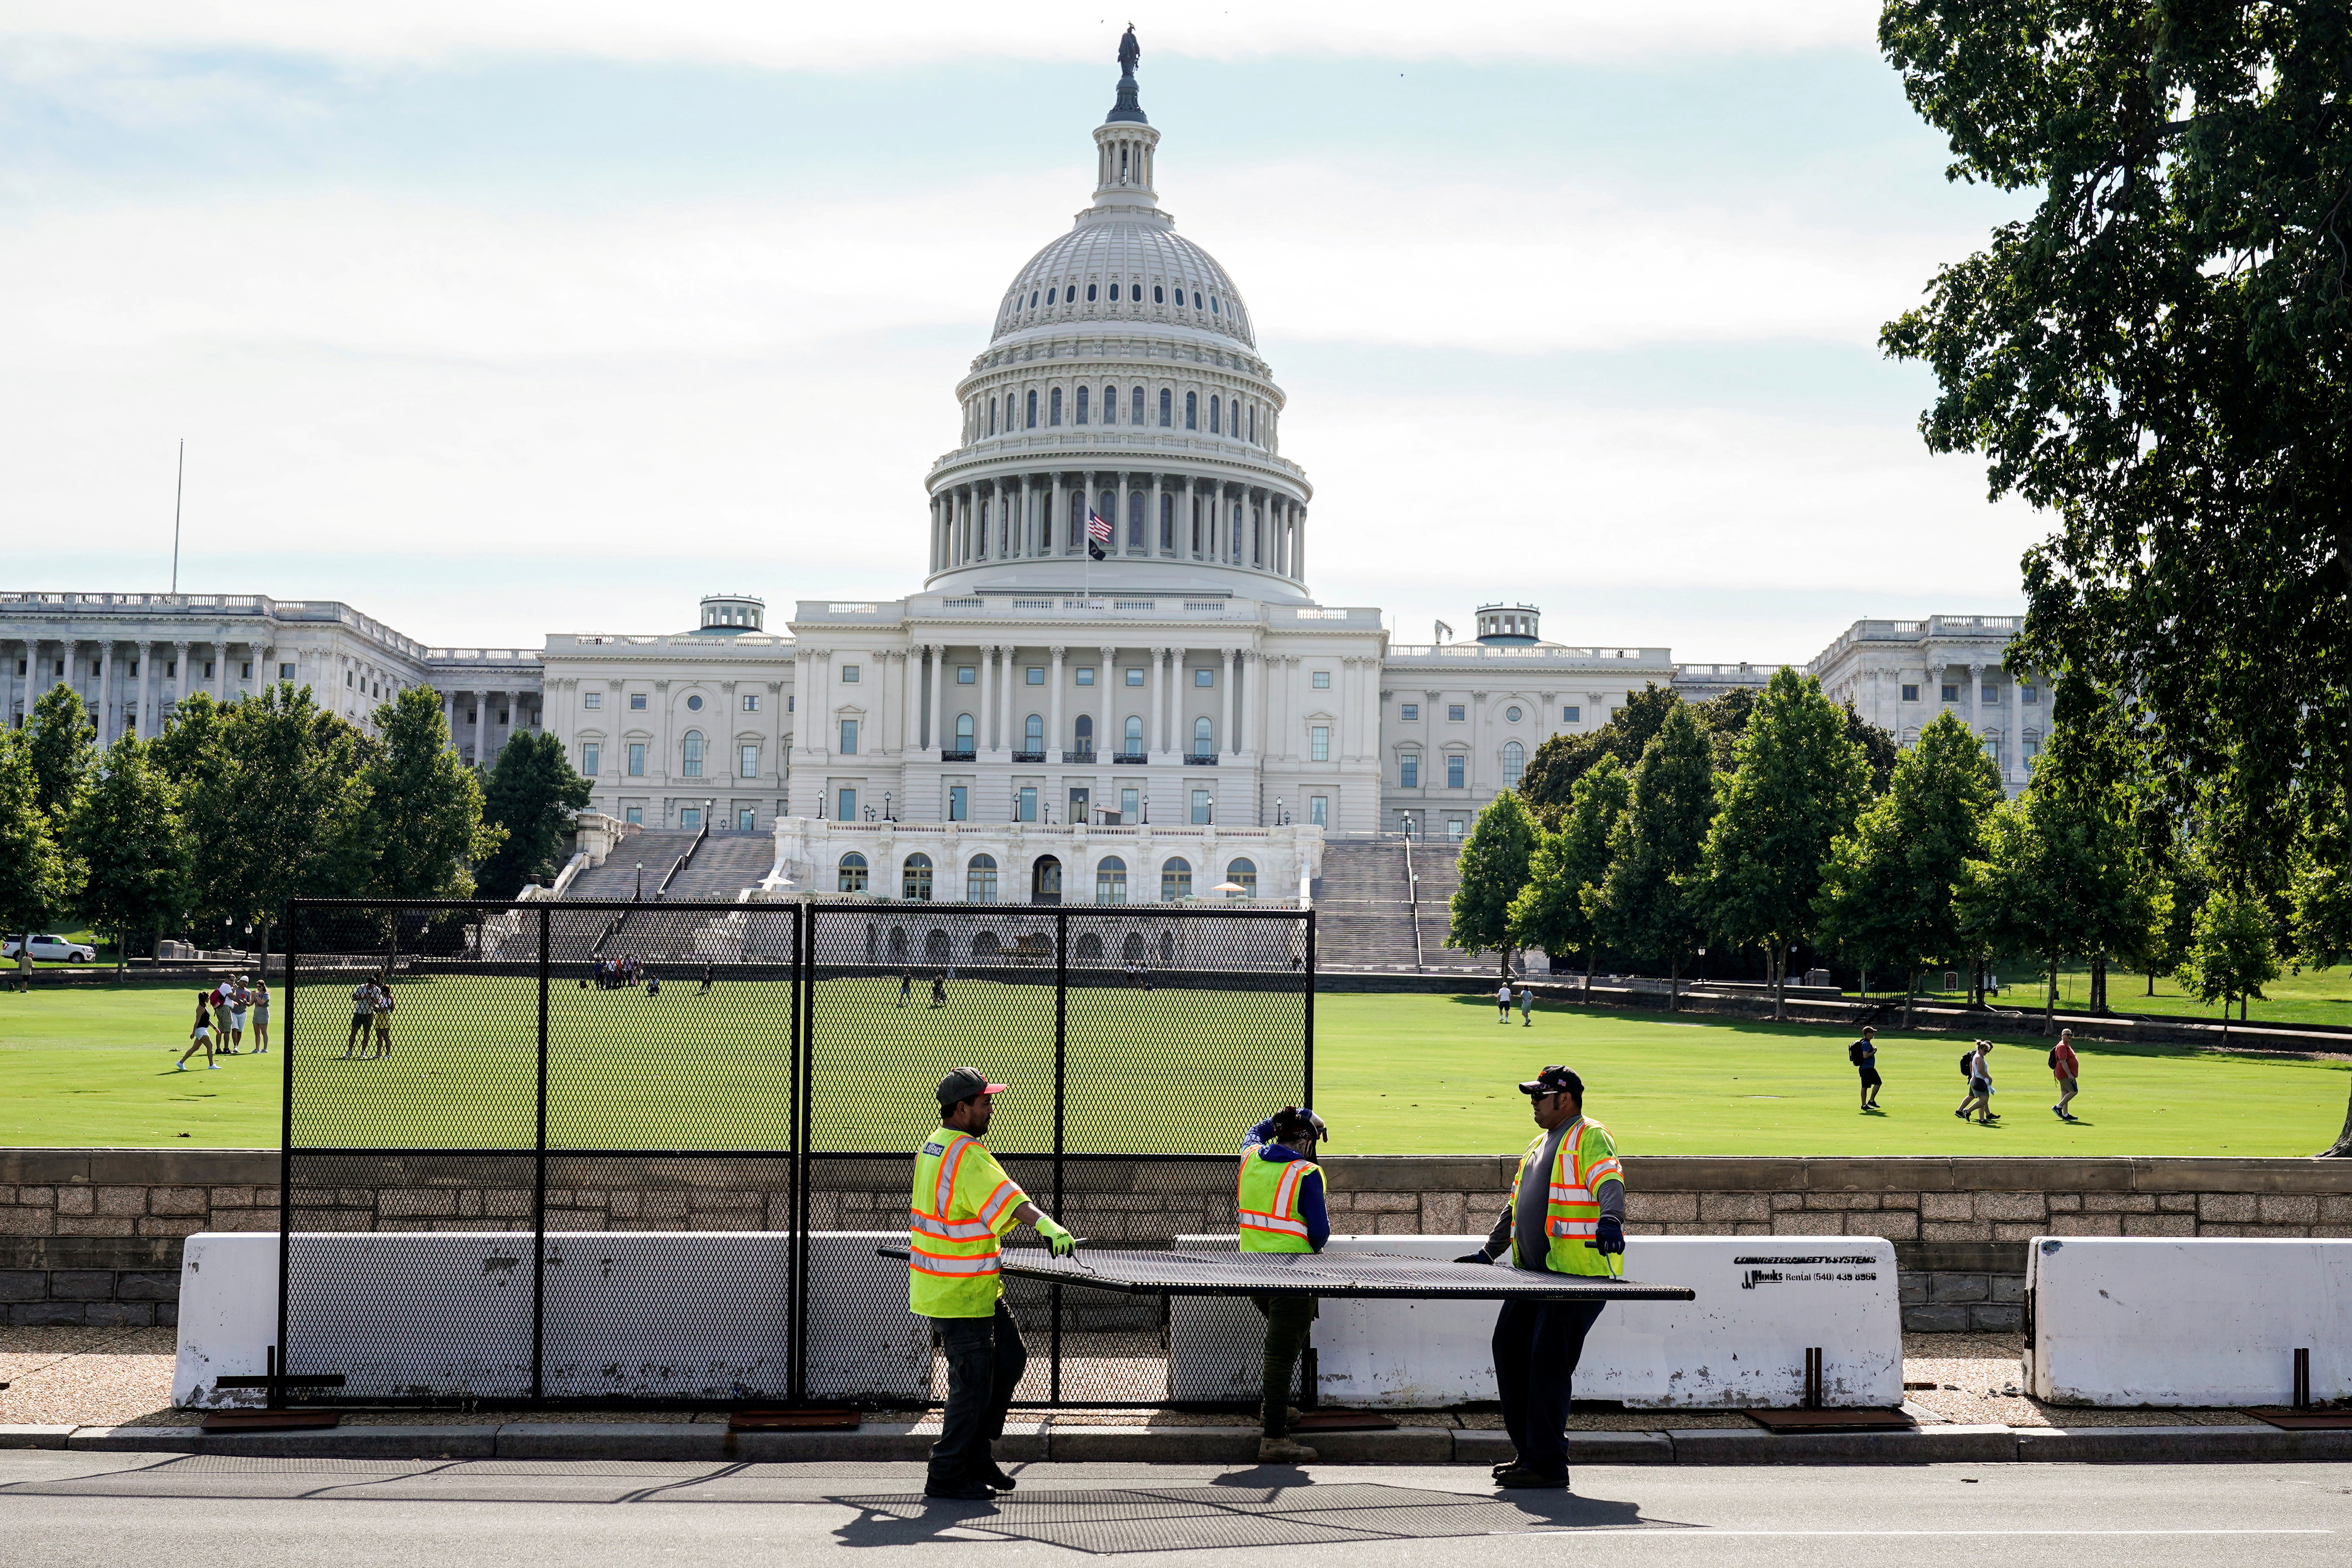 Fencing is being removed from the US Capitol in Washington